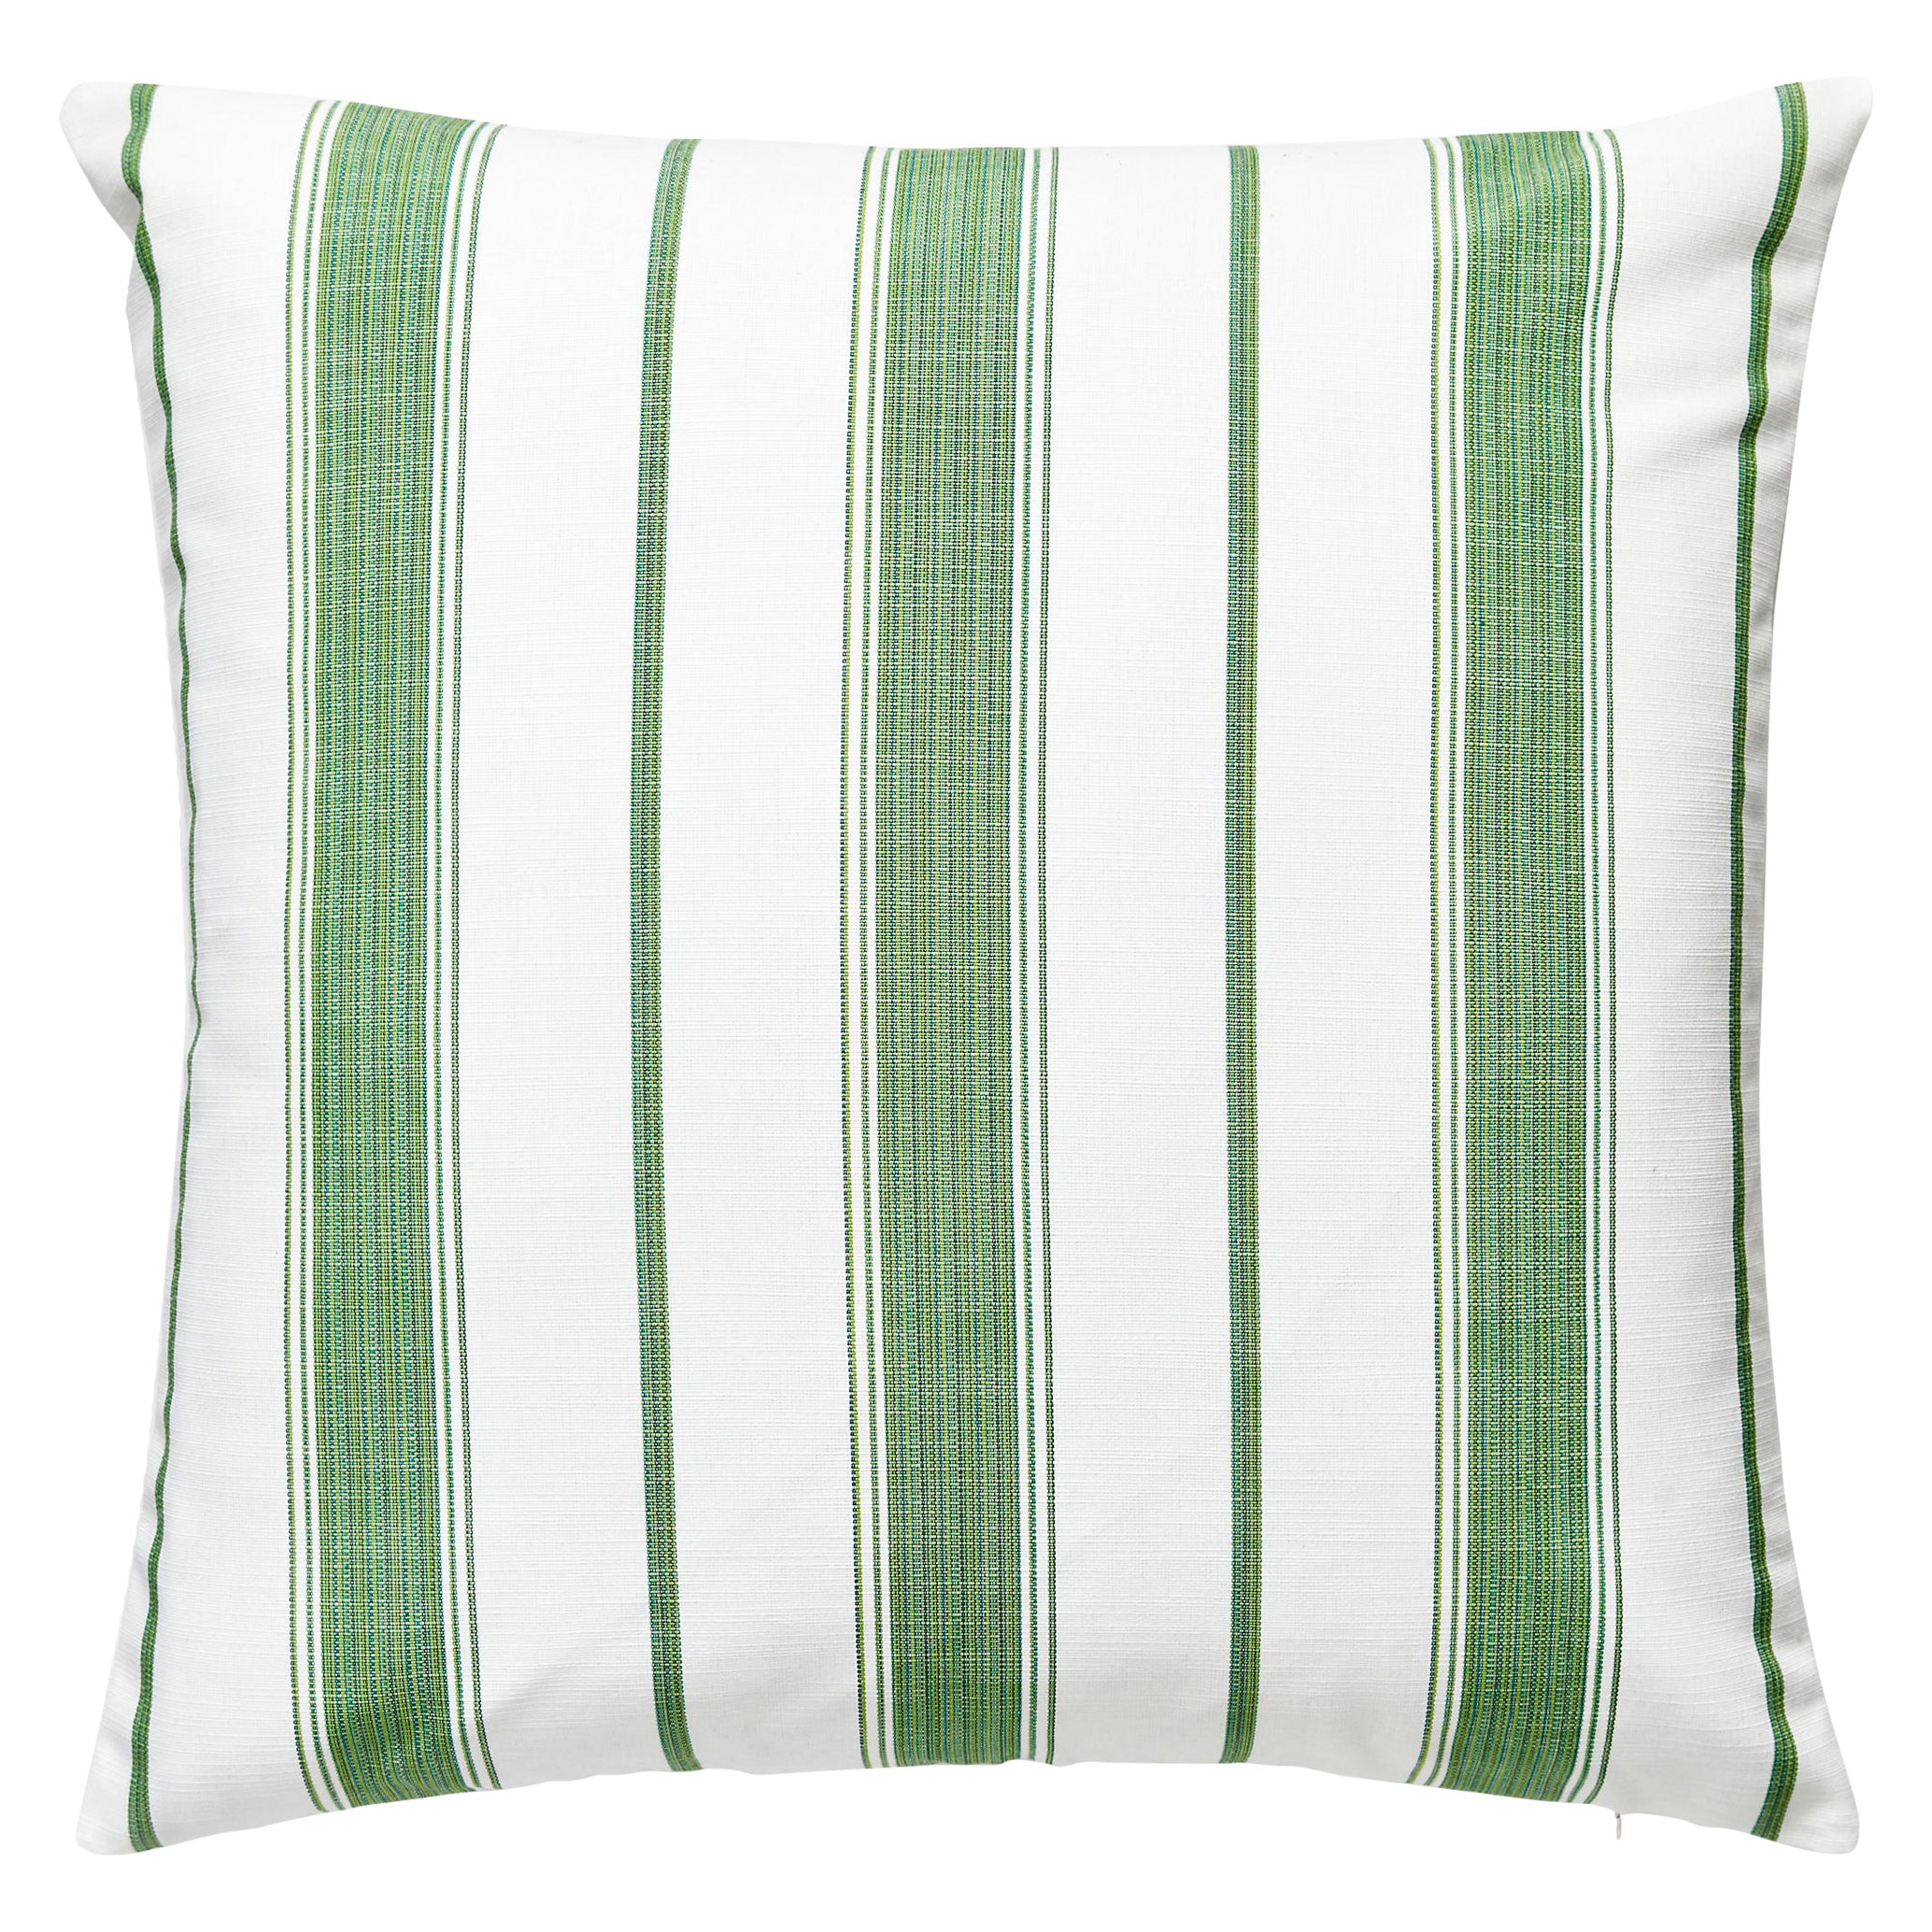 Sconset Outdoor Pillow For Sale